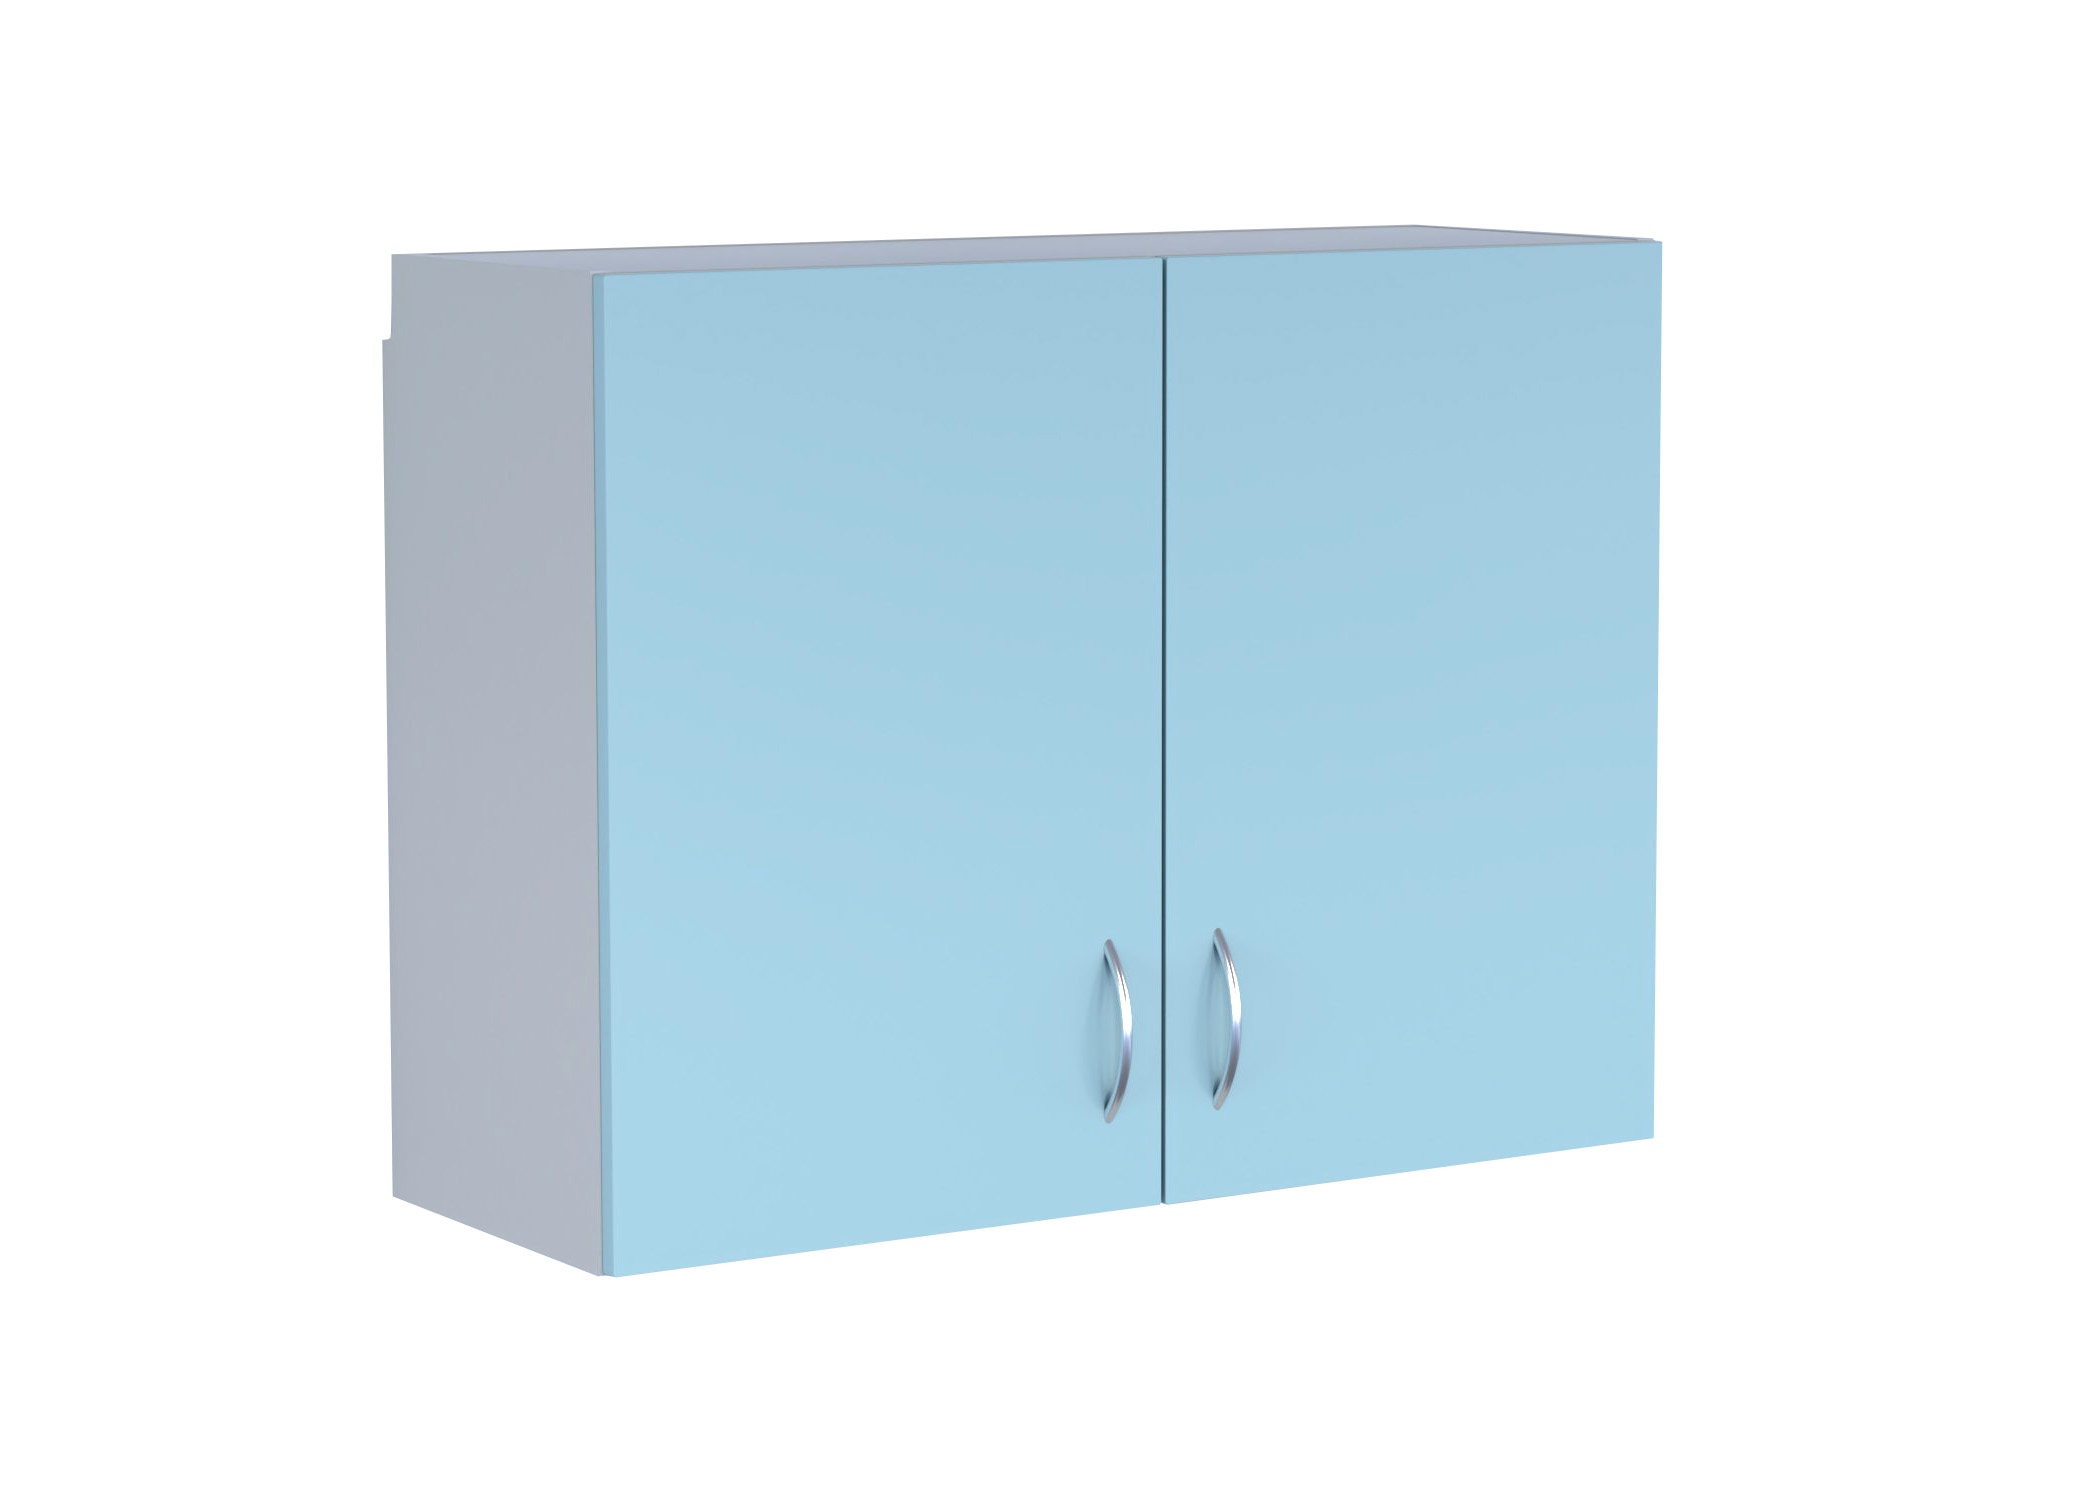 HTM63 760mm wall mounted cupboard